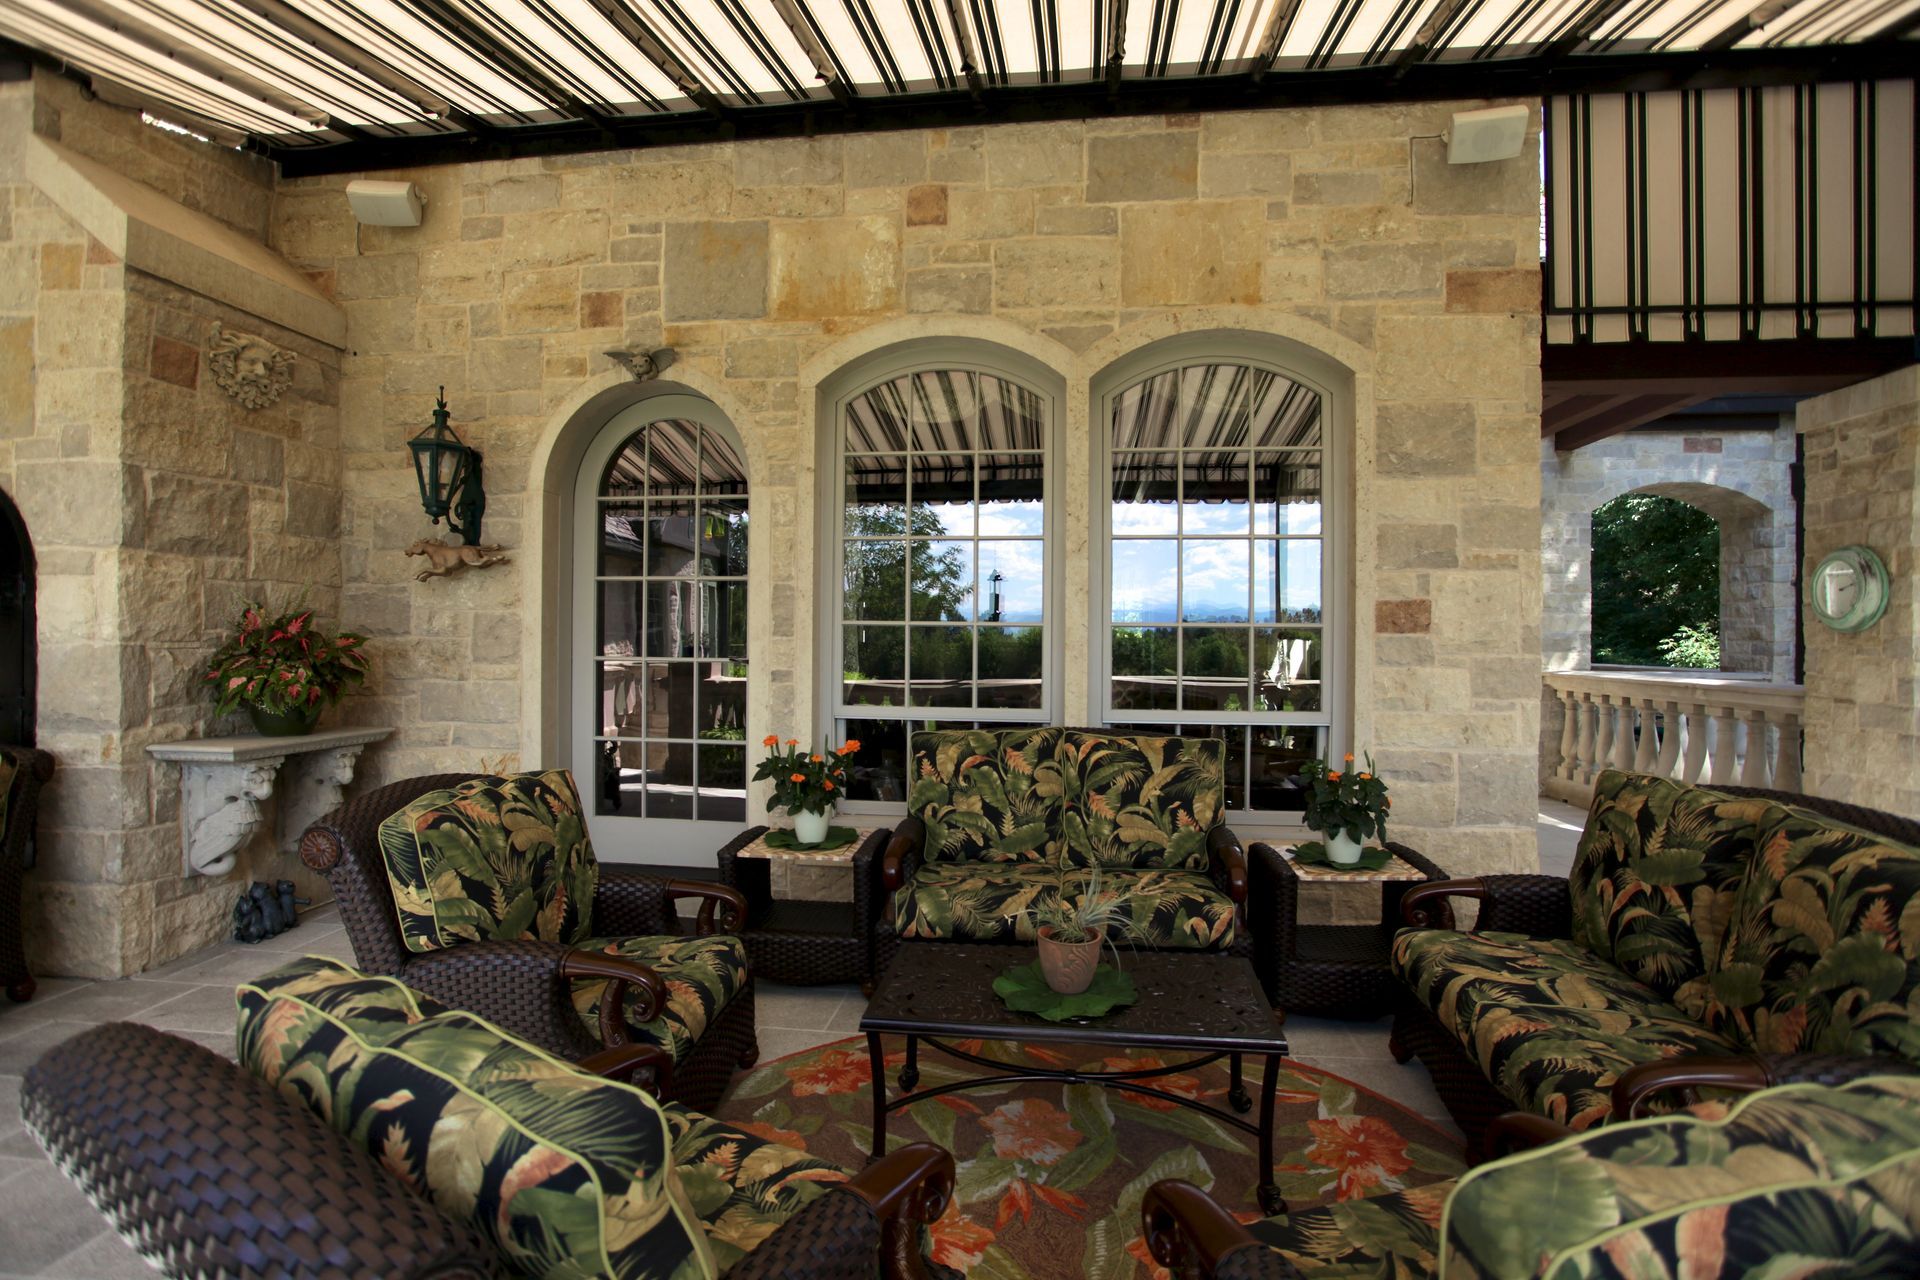 Incorporate Natural Stone Veneer Into Your Home or Business Design With Stockman Stoneworks.